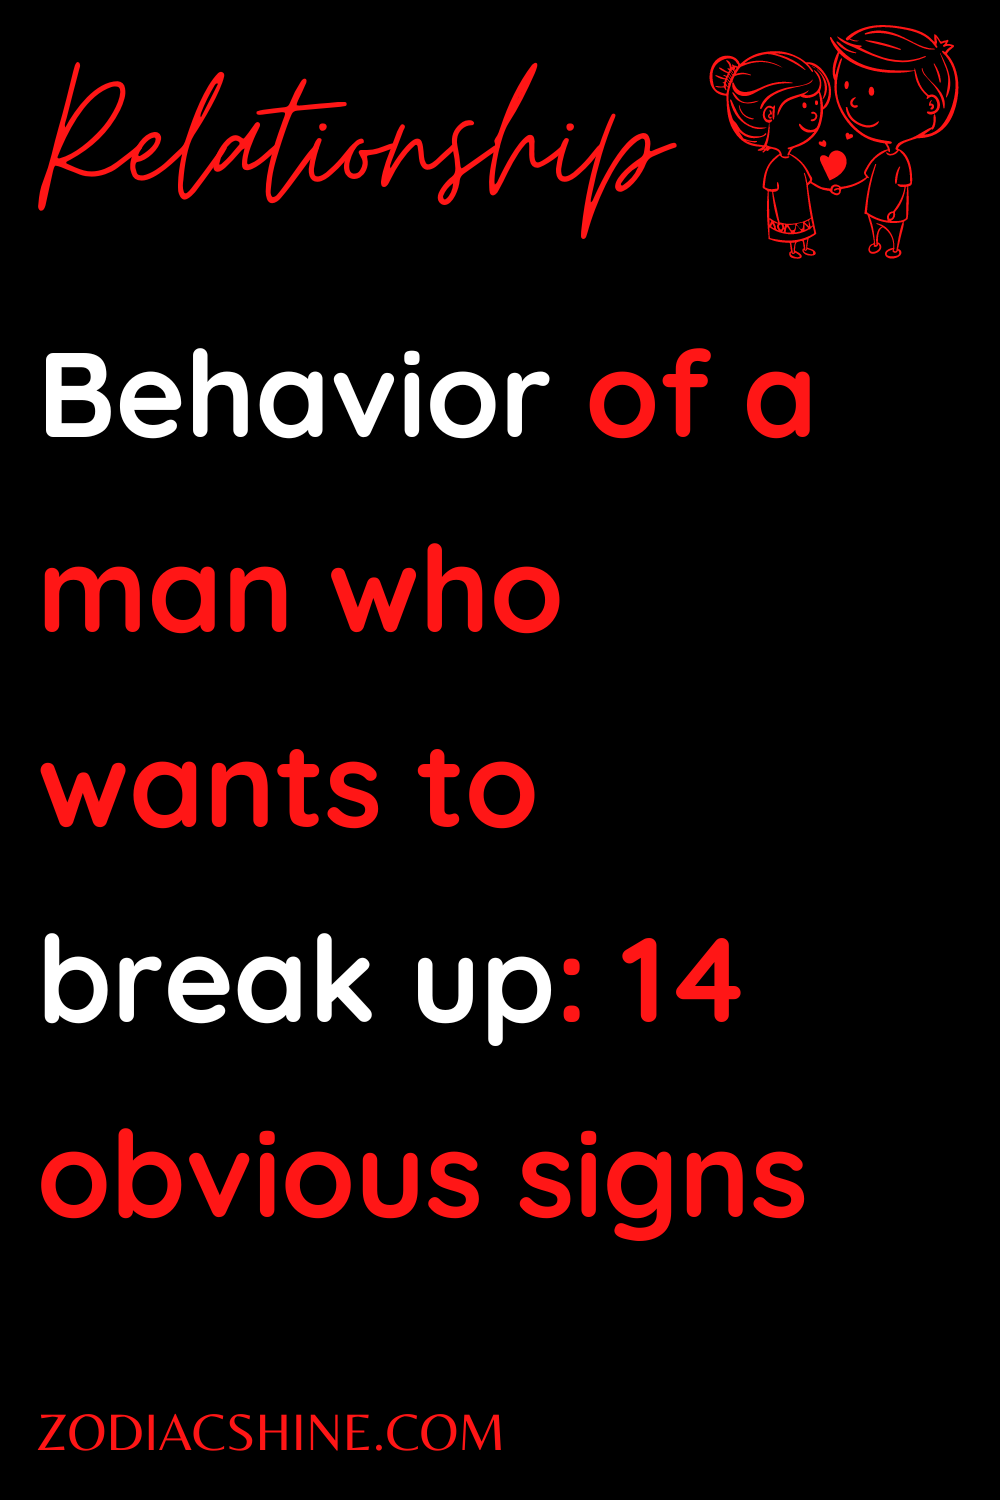 Behavior of a man who wants to break up: 14 obvious signs